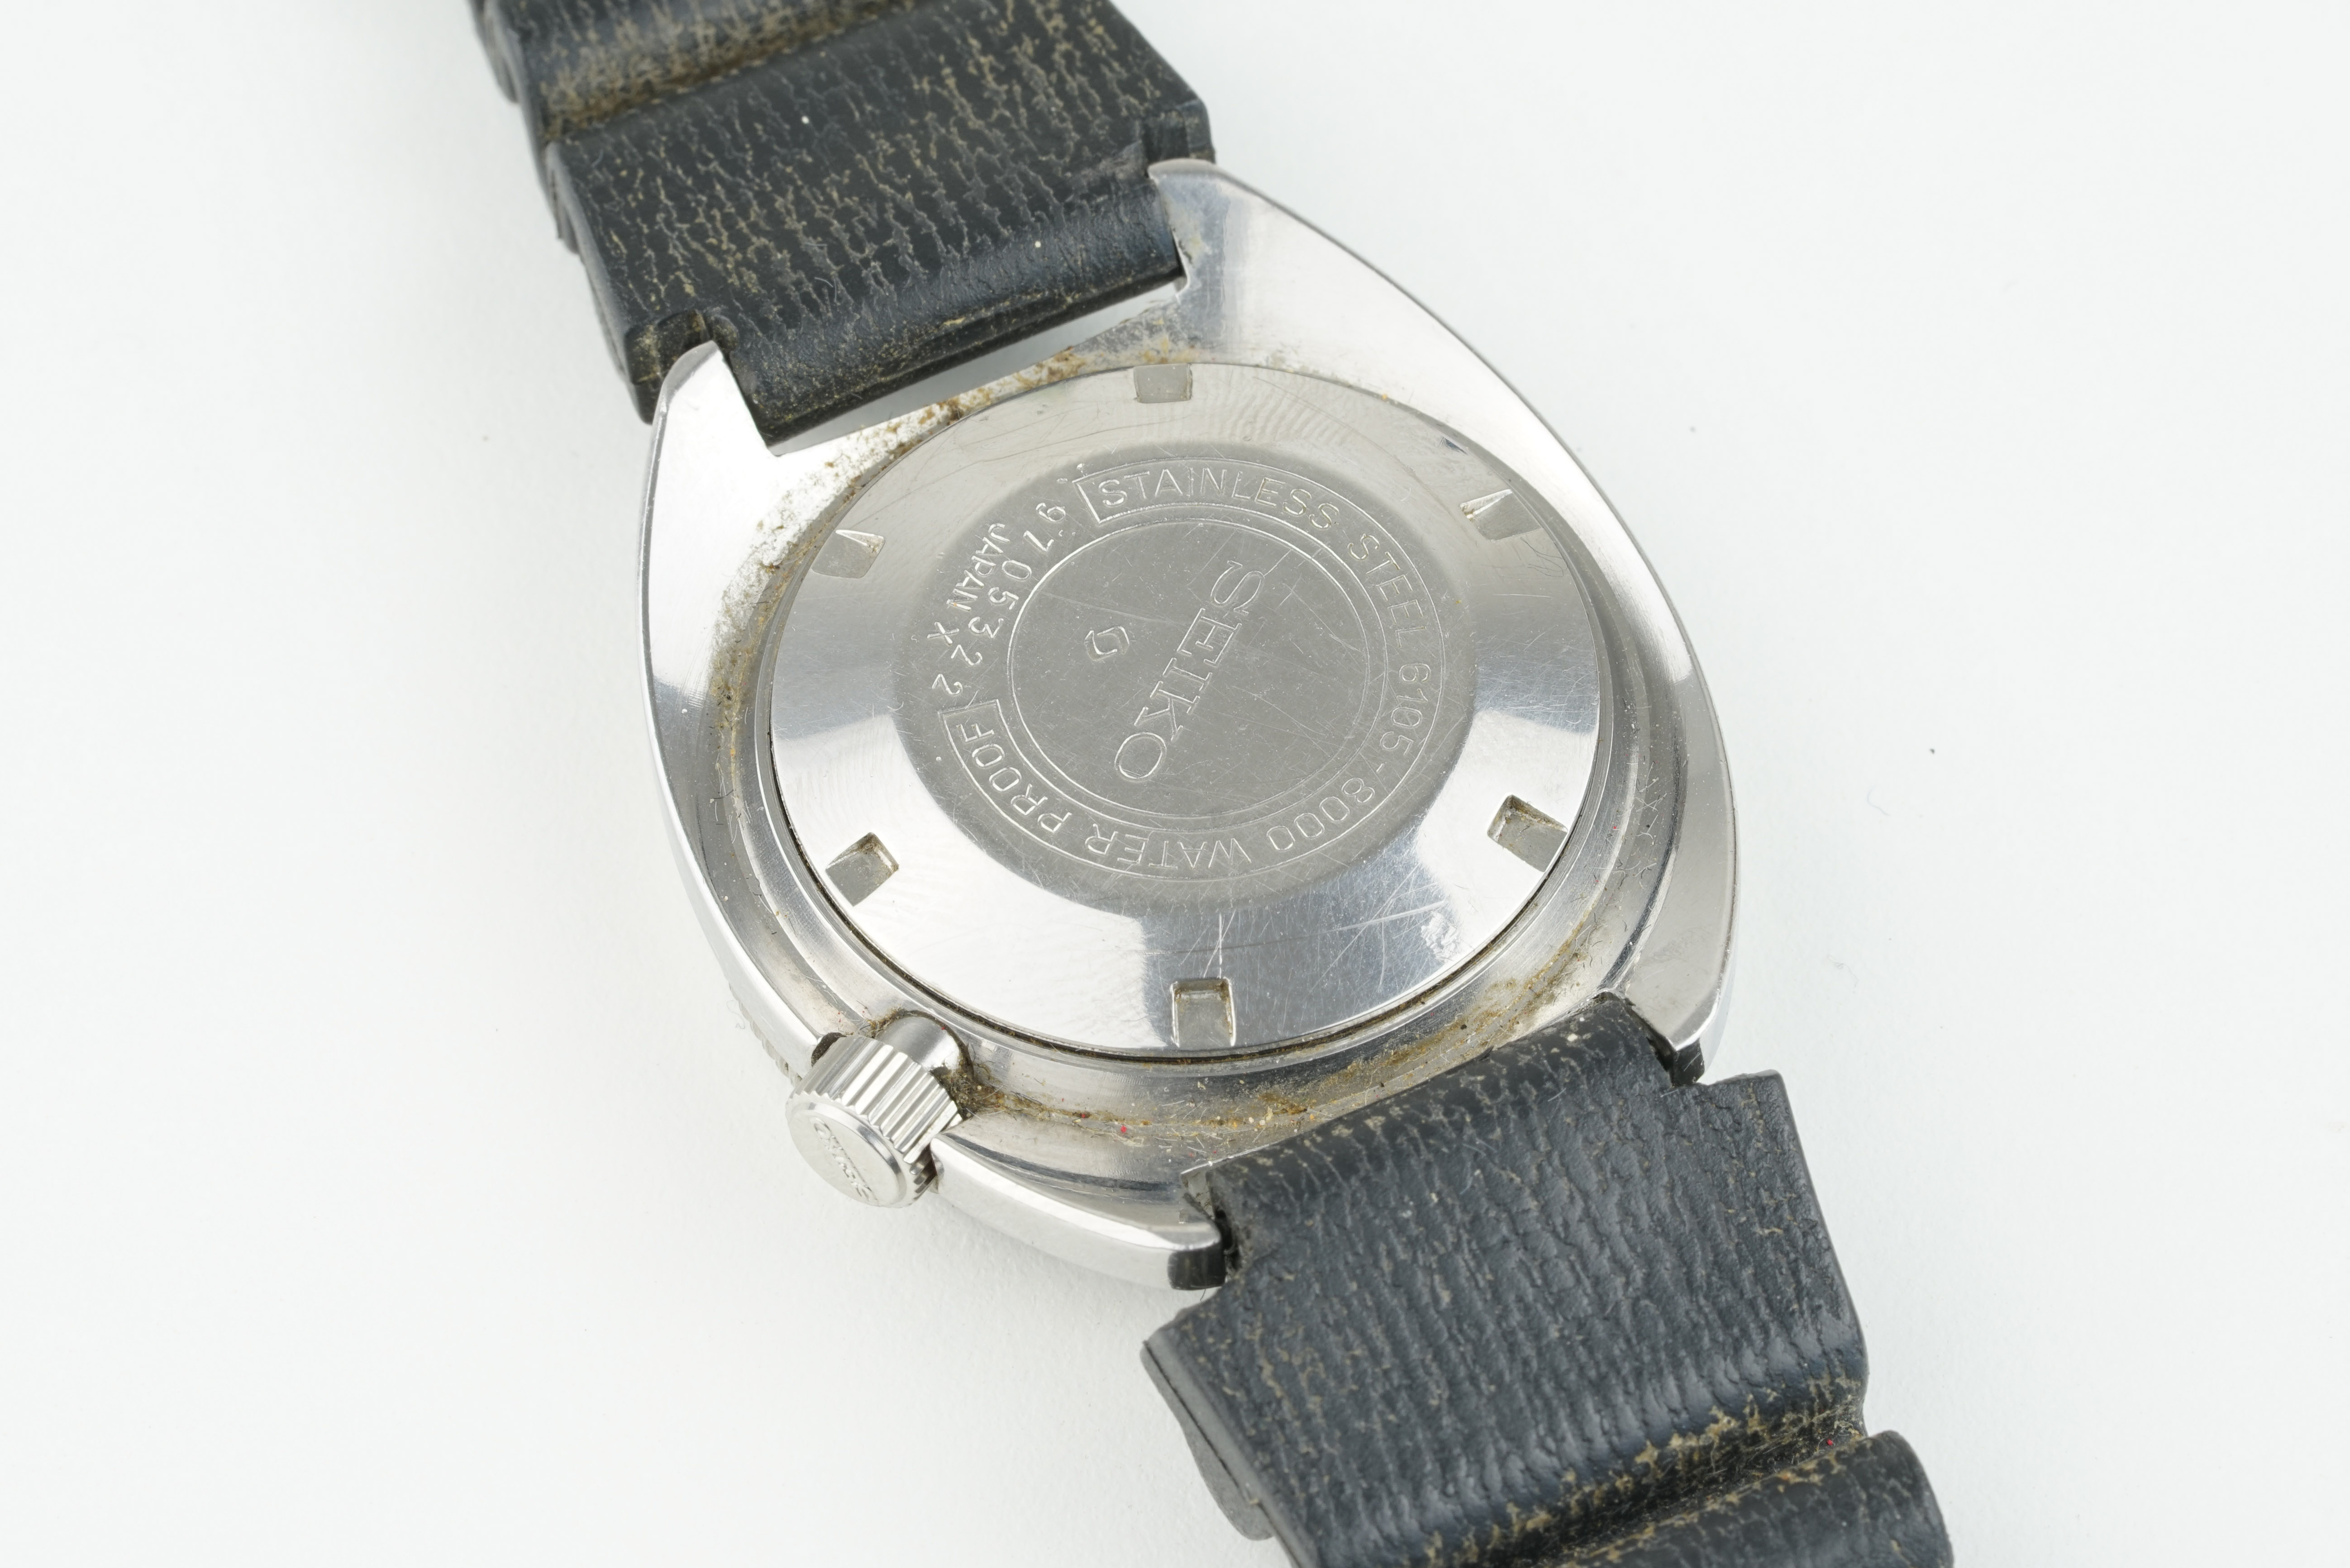 SEIKO AUTOMATIC DATE DIVER WRISTWATCH REF. 6105-8000, circular black dial with block hour markers - Image 2 of 2